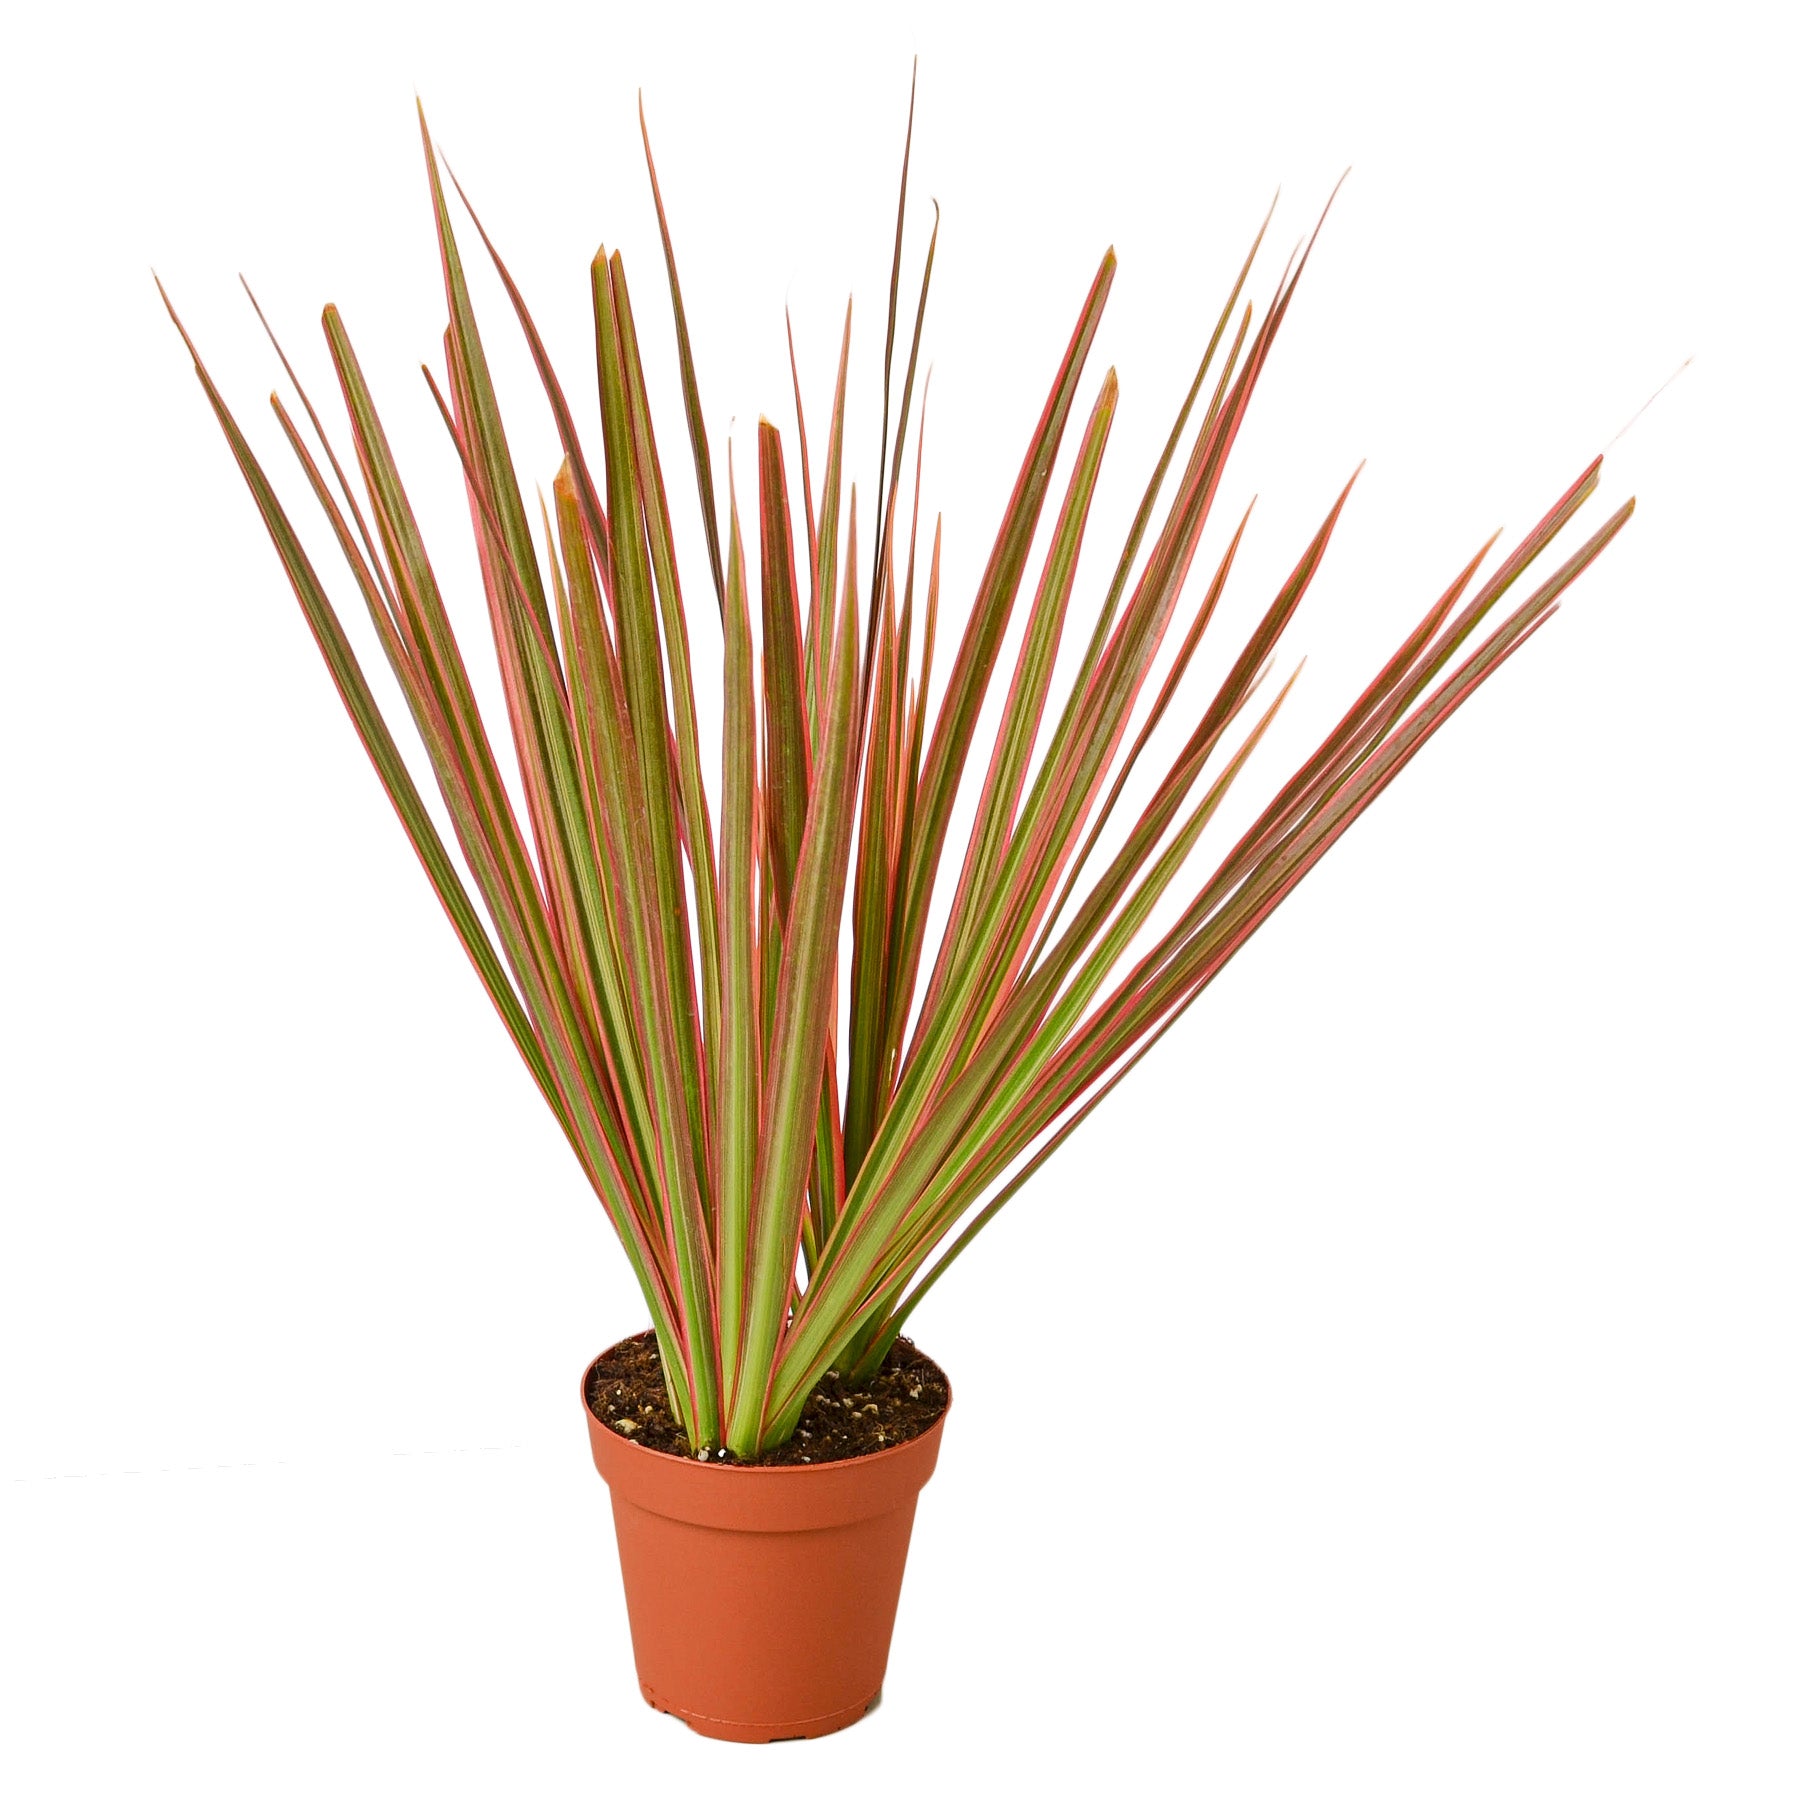 A potted plant with red and brown leaves, available at the best garden center near me.